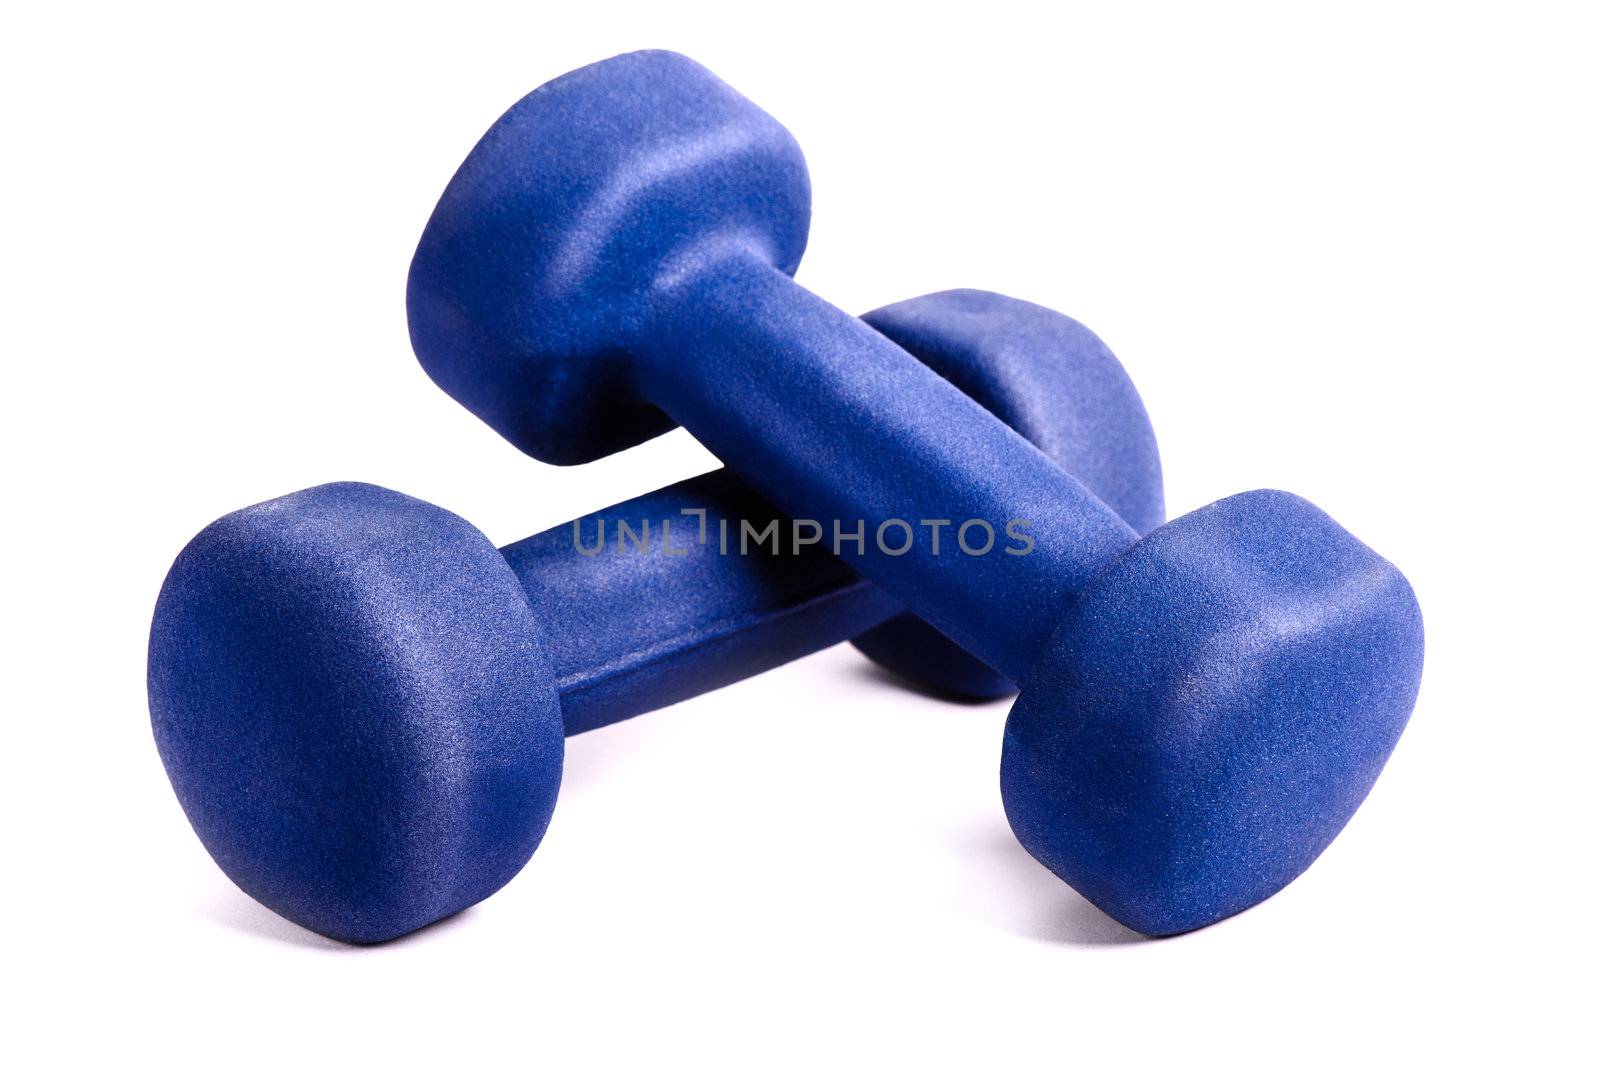 Two blue dumbbells by nvelichko